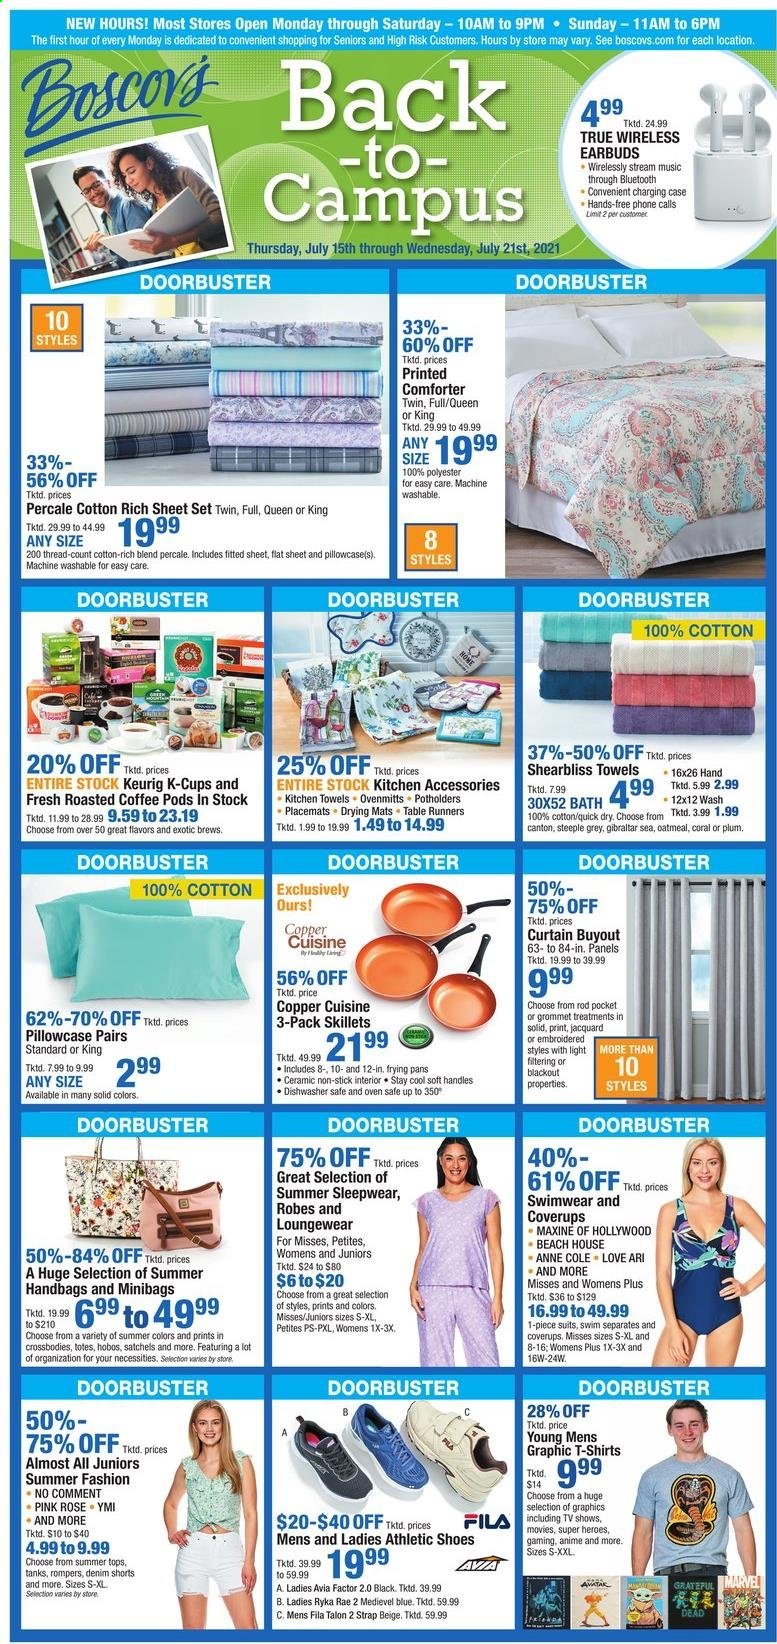 thumbnail - Boscov's Flyer - 07/15/2021 - 07/21/2021 - Sales products - Fila, shoes, athletic shoes, Ryka, quick dry, table runner, placemat, kitchen towels, comforter, pillowcase, curtain, table, loungewear, shorts, t-shirt, tops, handbag, tote, robe, swimming suit, sleepwear. Page 1.